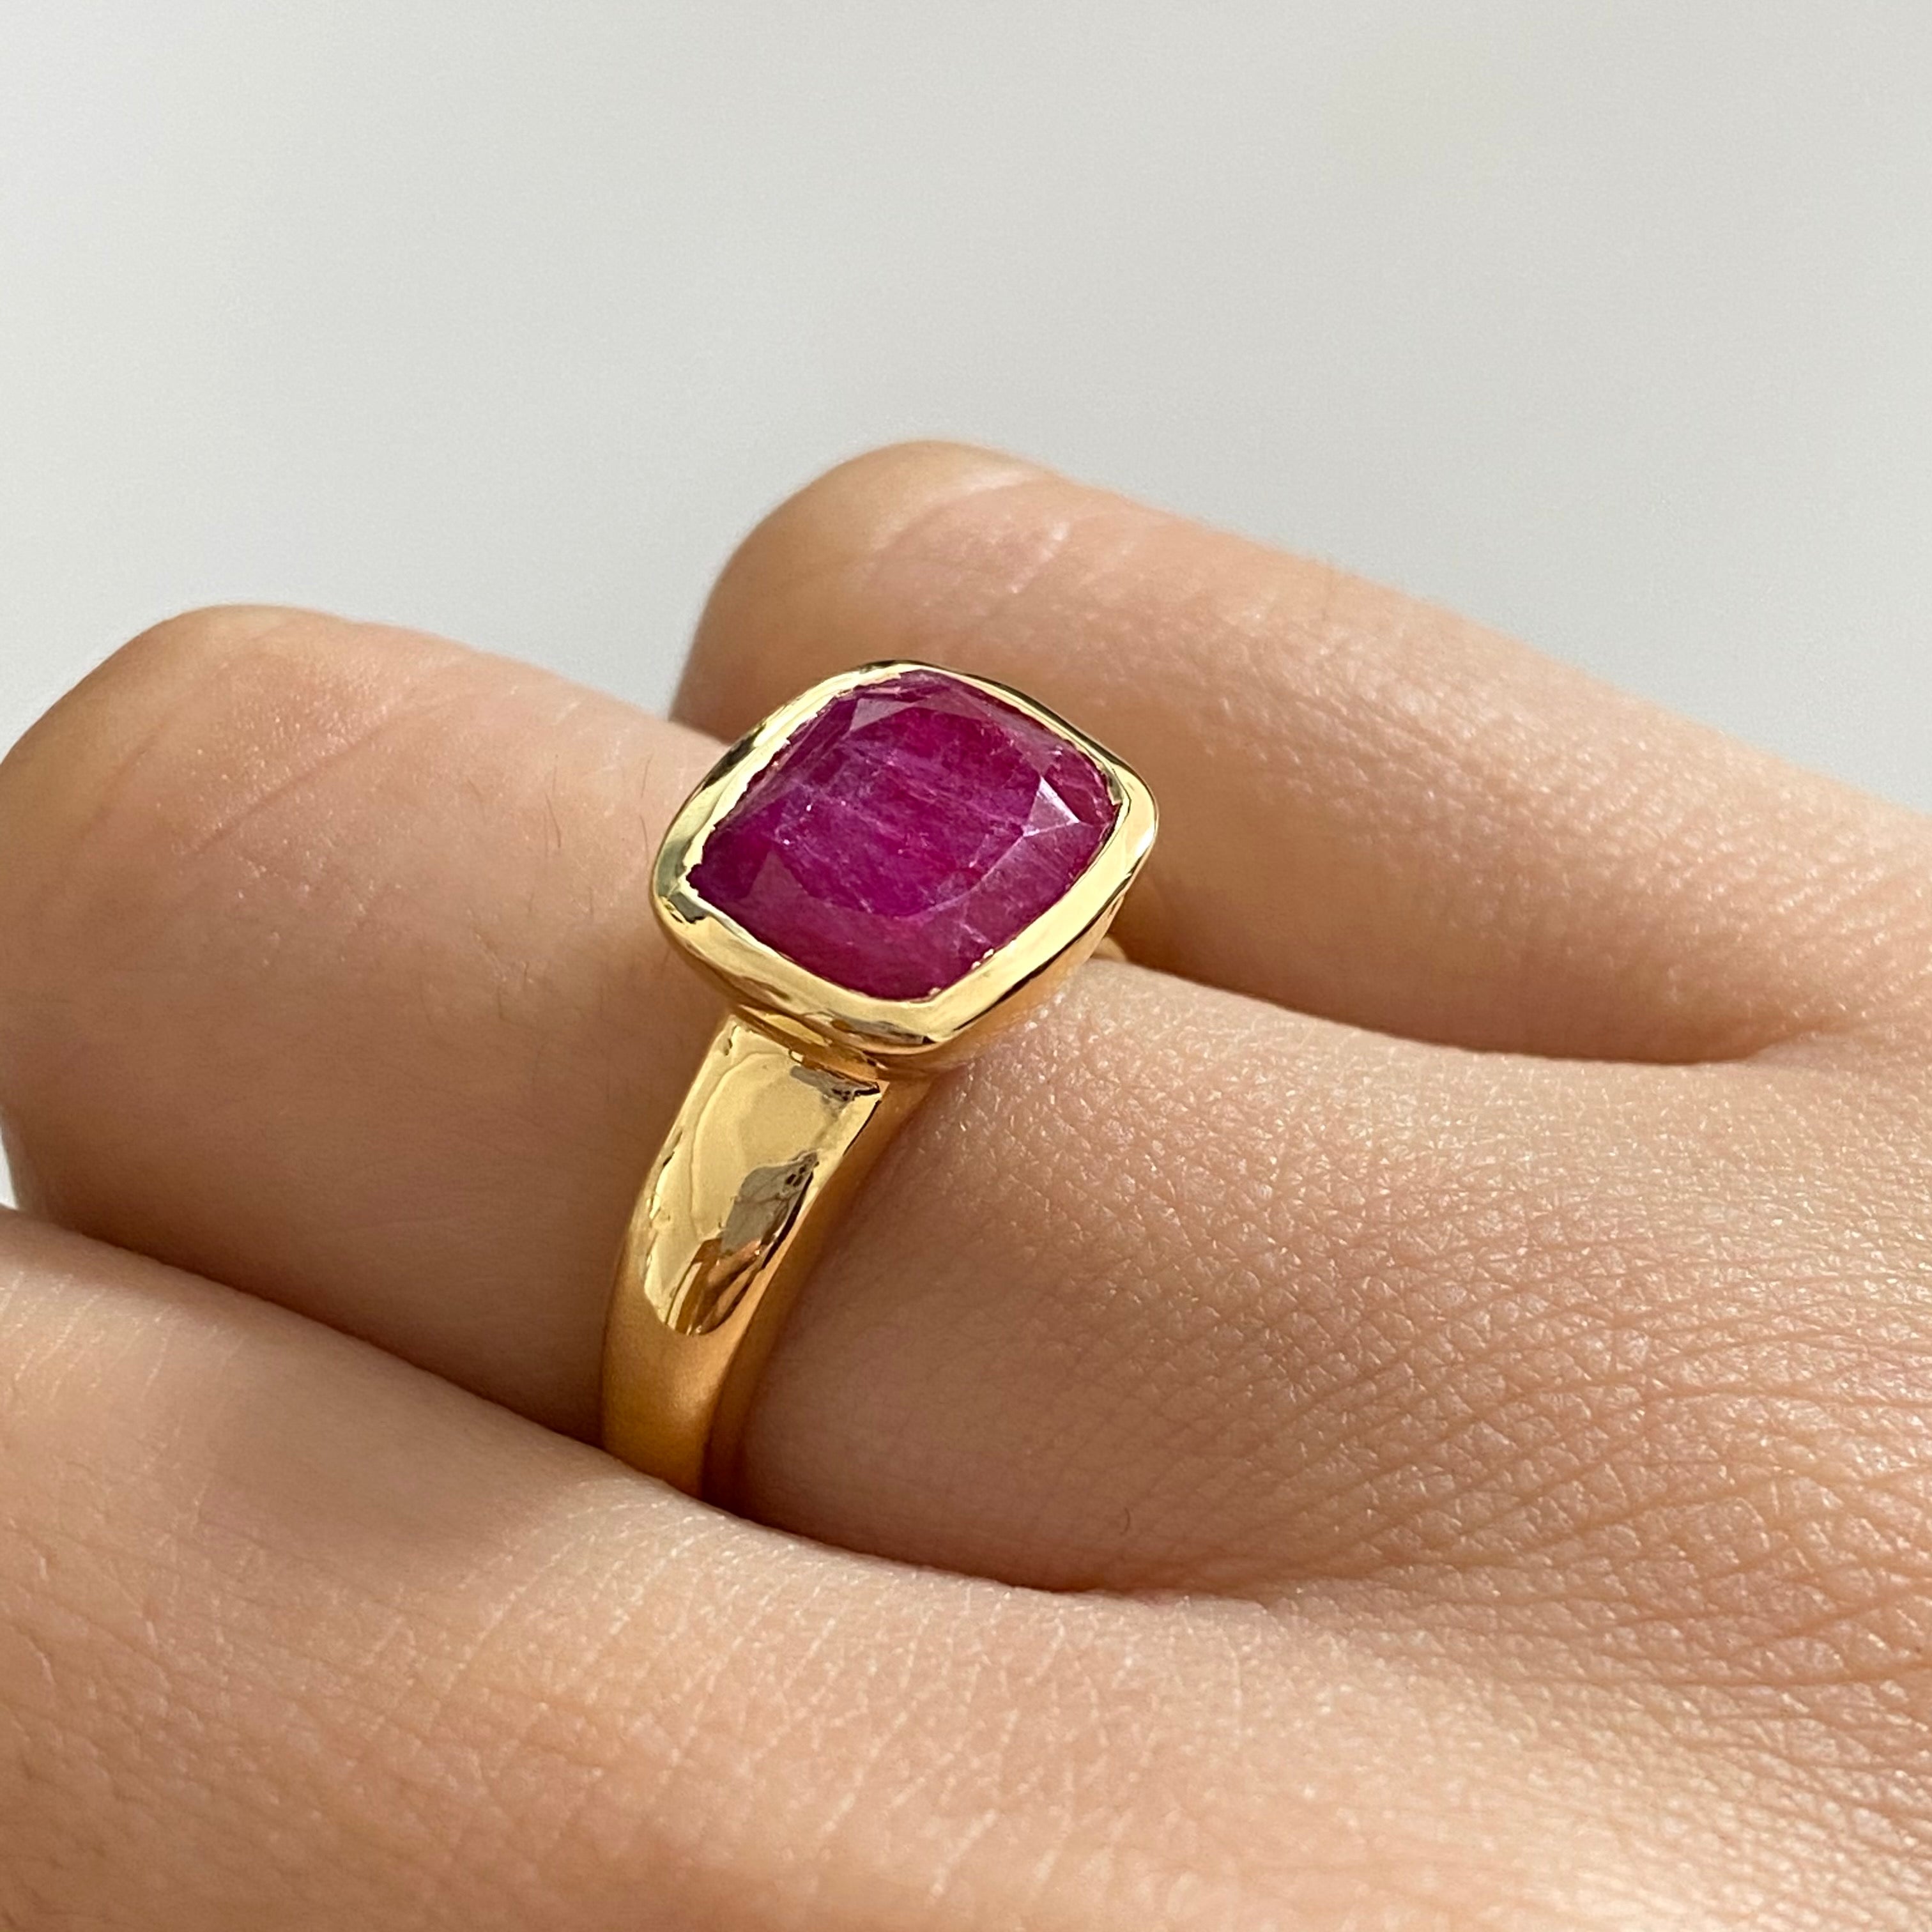 Faceted Rectangular Cut Natural Gemstone Gold Plated Sterling Silver Ring - Ruby Quartz